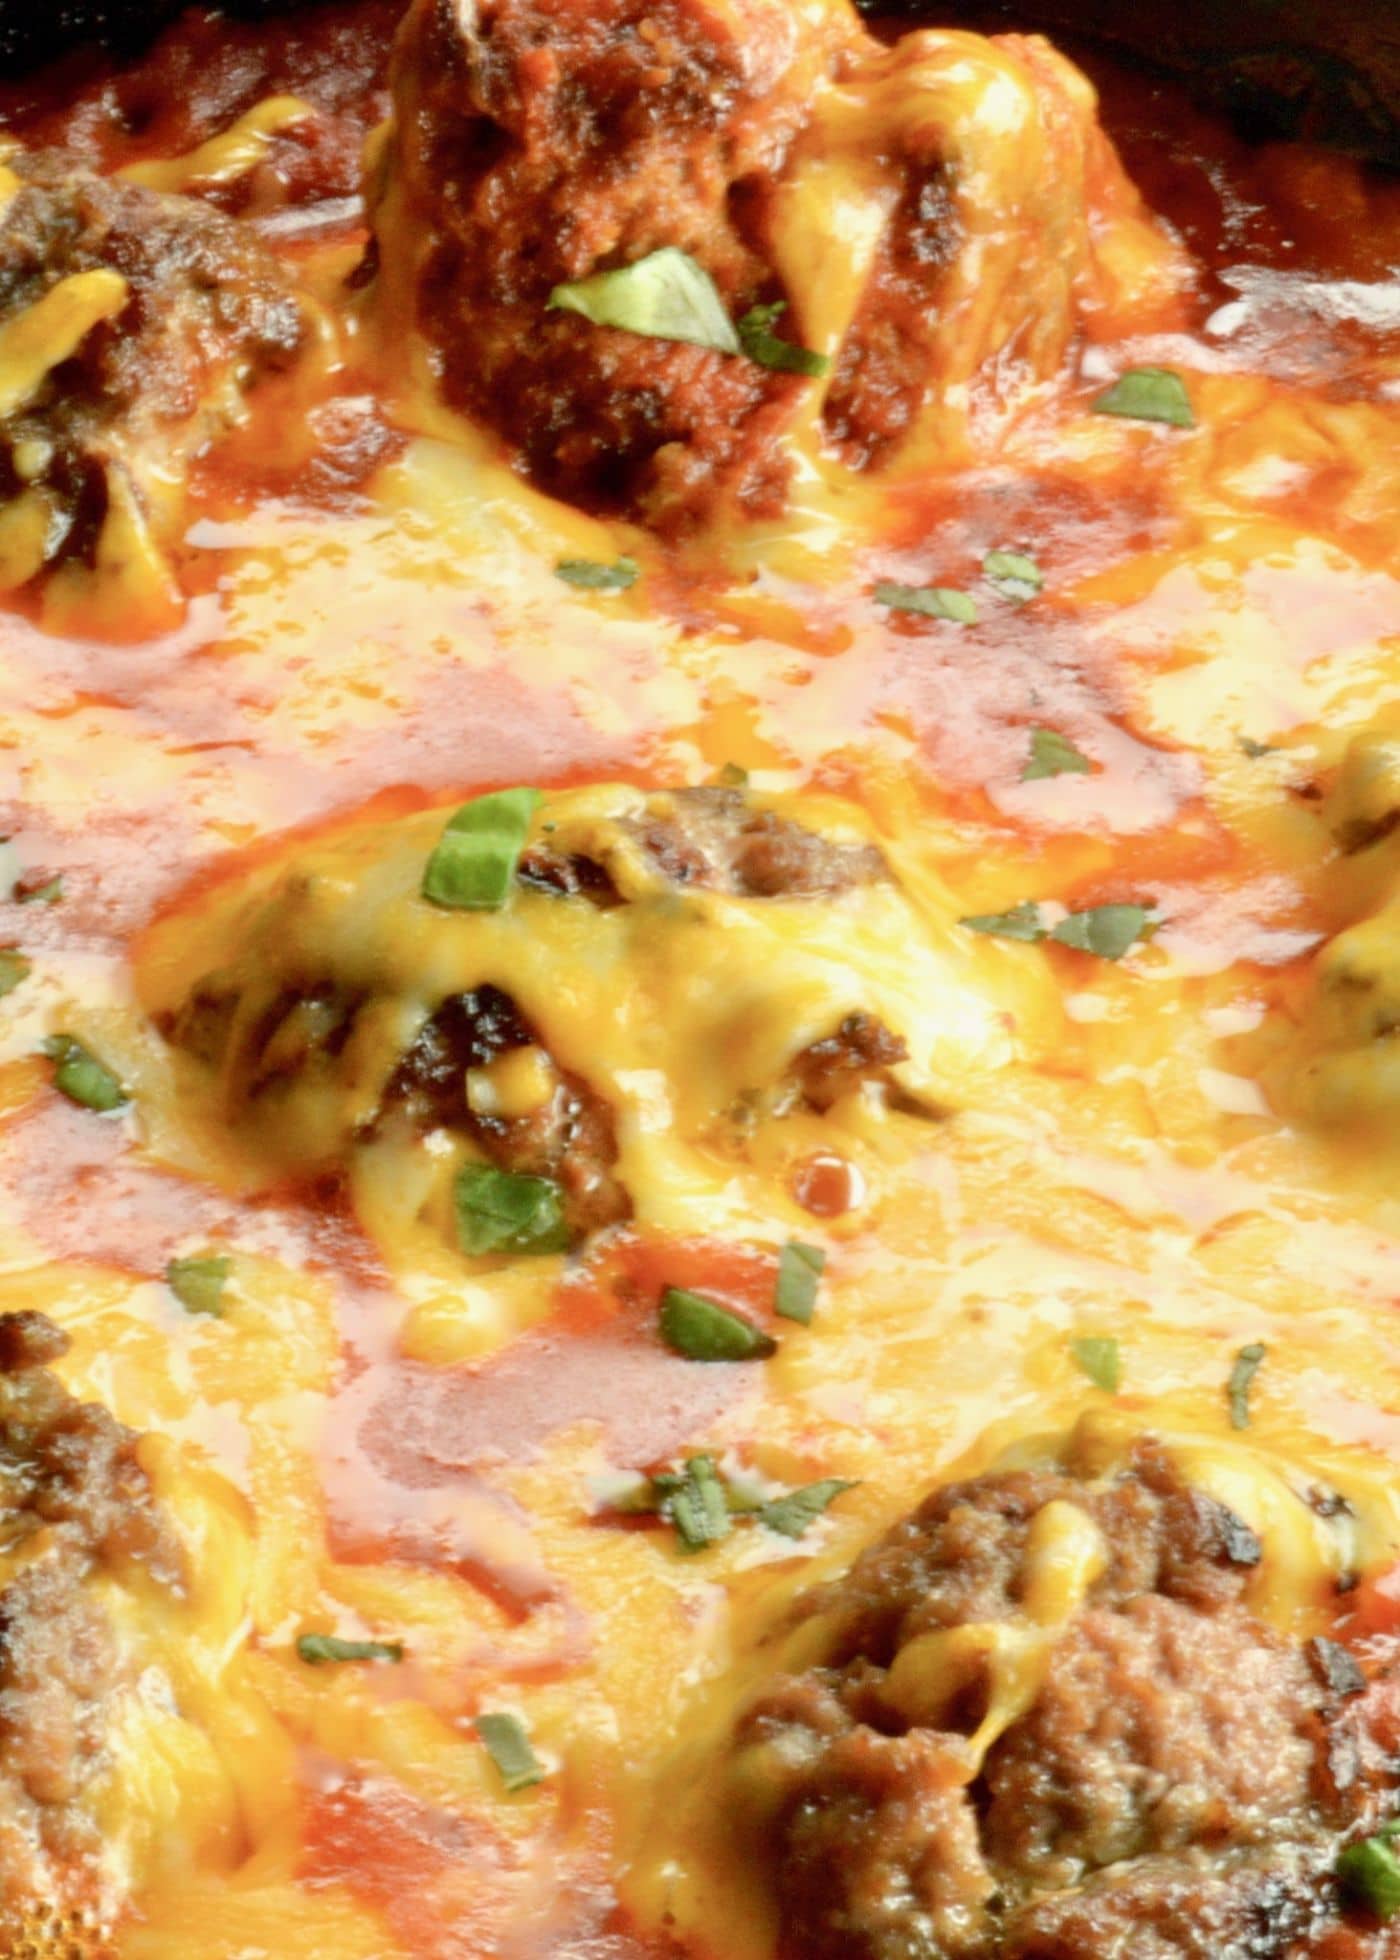 Cheesy Meatball Skillet dip is a quick appetizer that your guests will love.  Tender meatballs, with a light tomato sauce with lots of melty cheeses for complete comfort food.